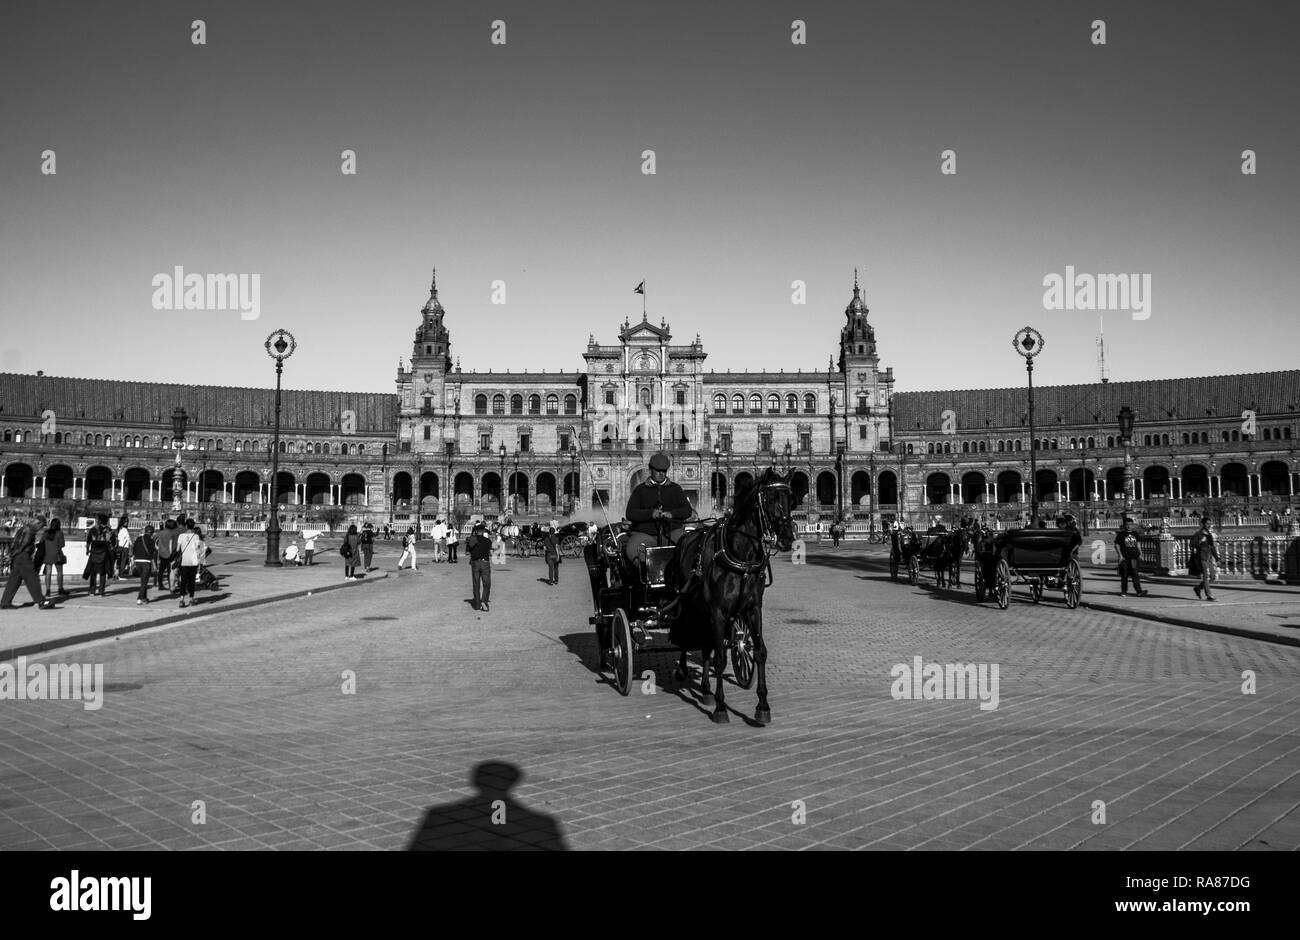 A carriage moving in the middle of Plaza de España, a square in Seville, capital of Andalusia, Spain. This square was build in 1928. Stock Photo